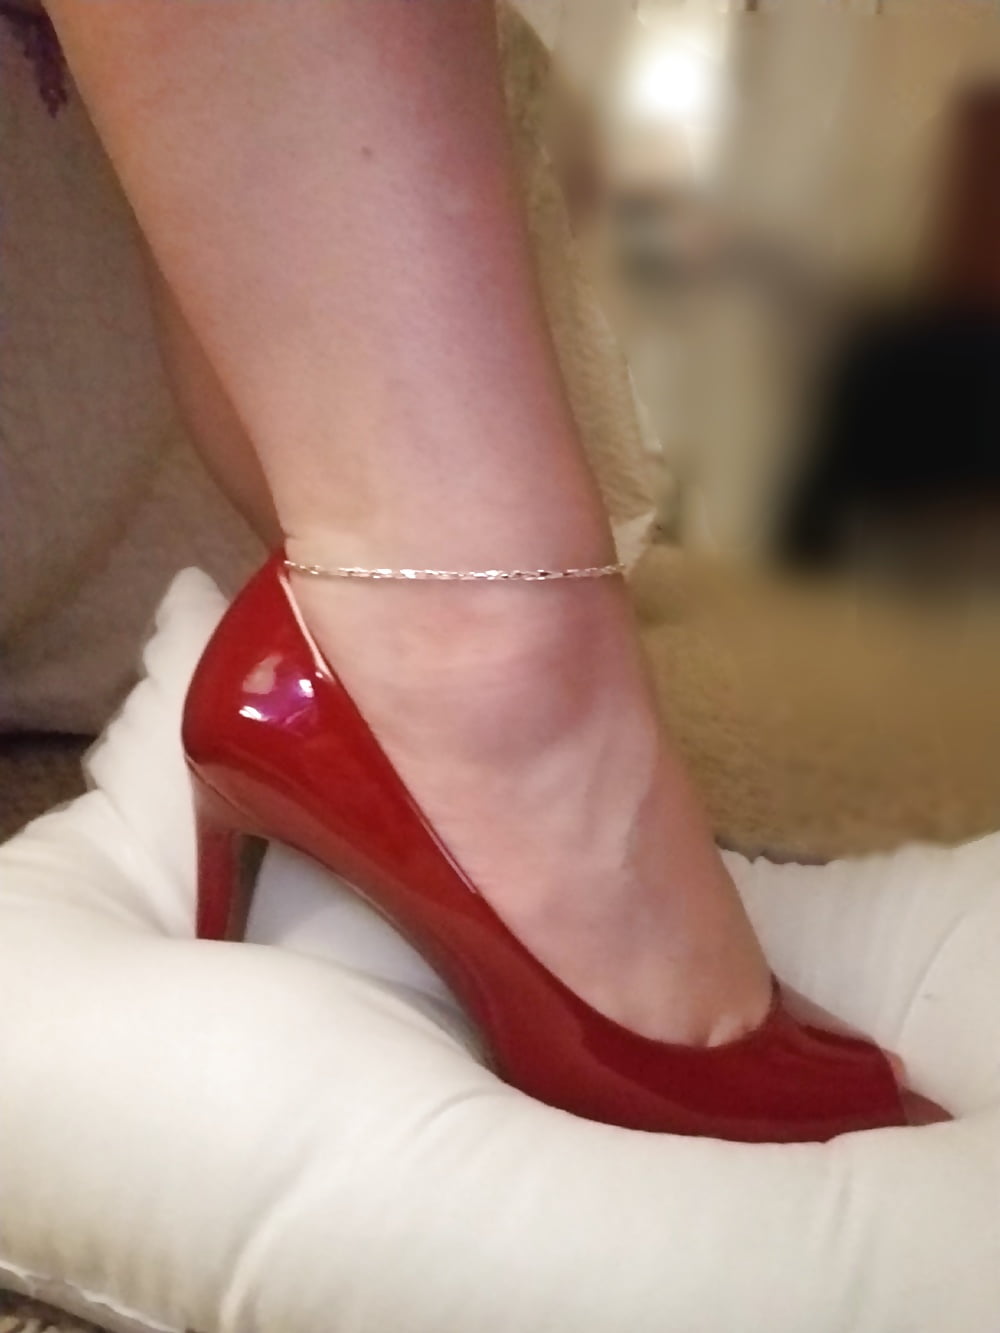 Feet, Legs, Heels &amp; Boots of the Sweet Sexy Housewife #106605602